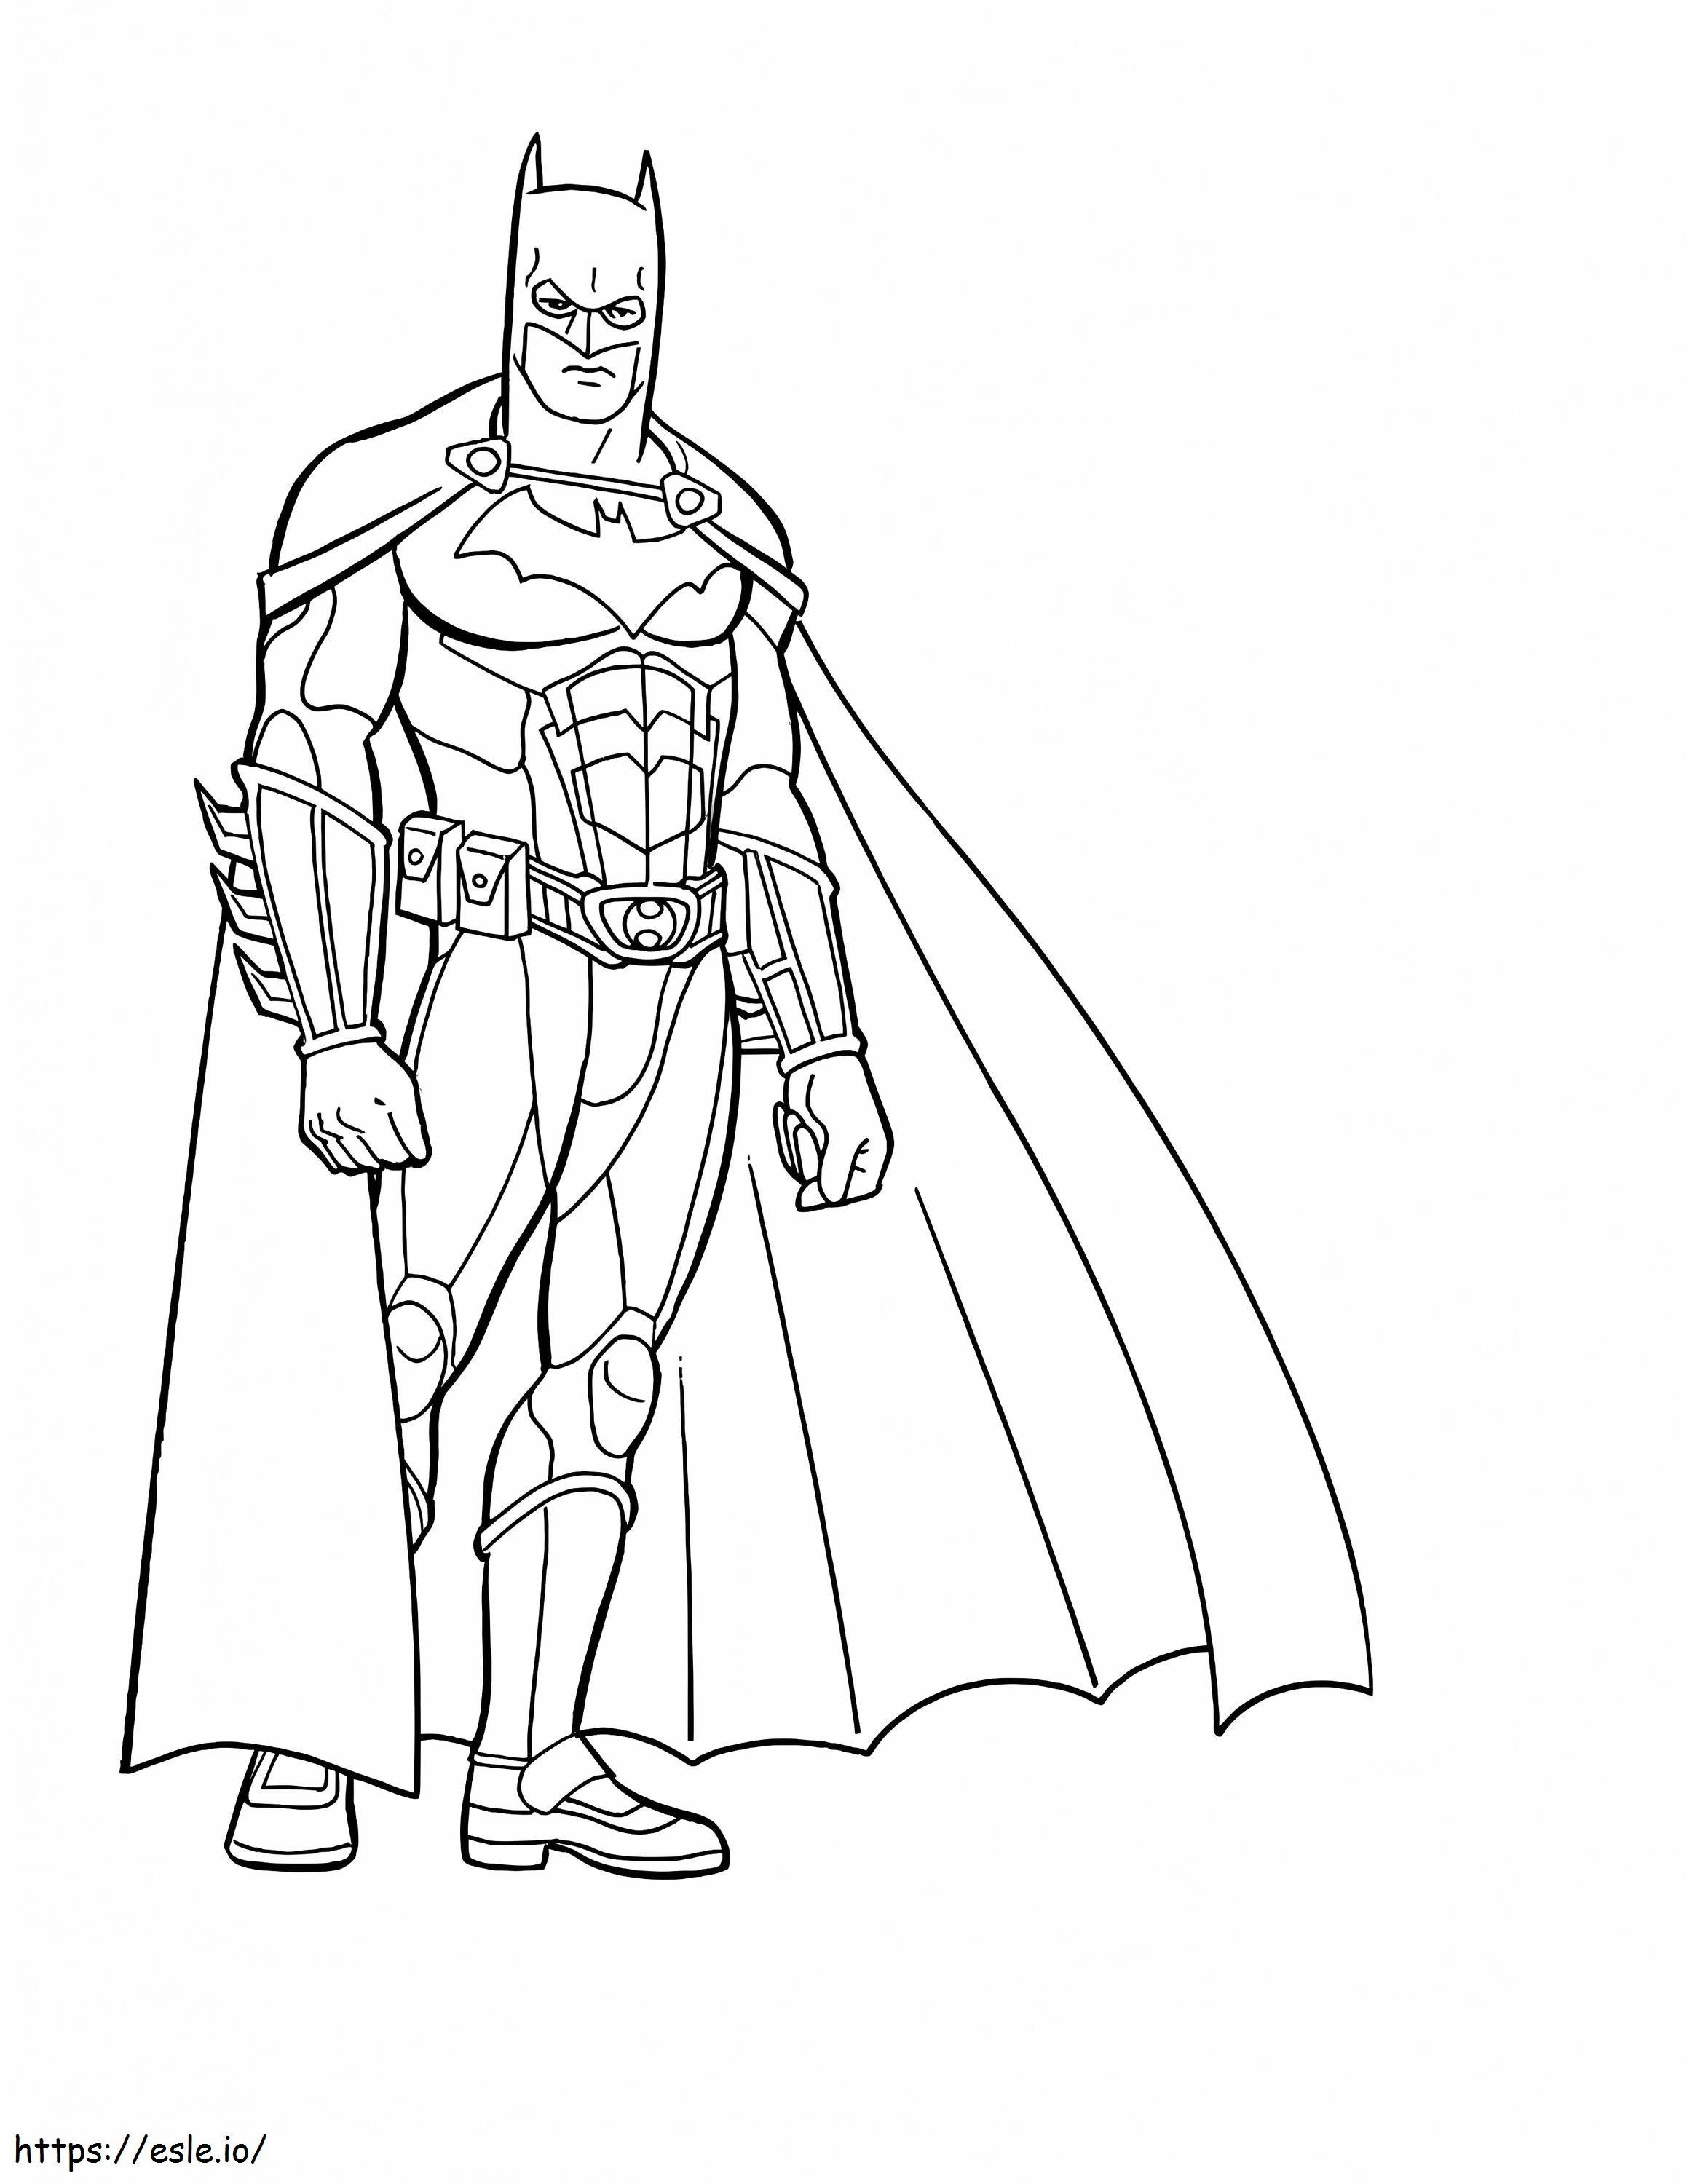 Freee Batman For Kids Colouring Superhero Girls And Up Hulk coloring page